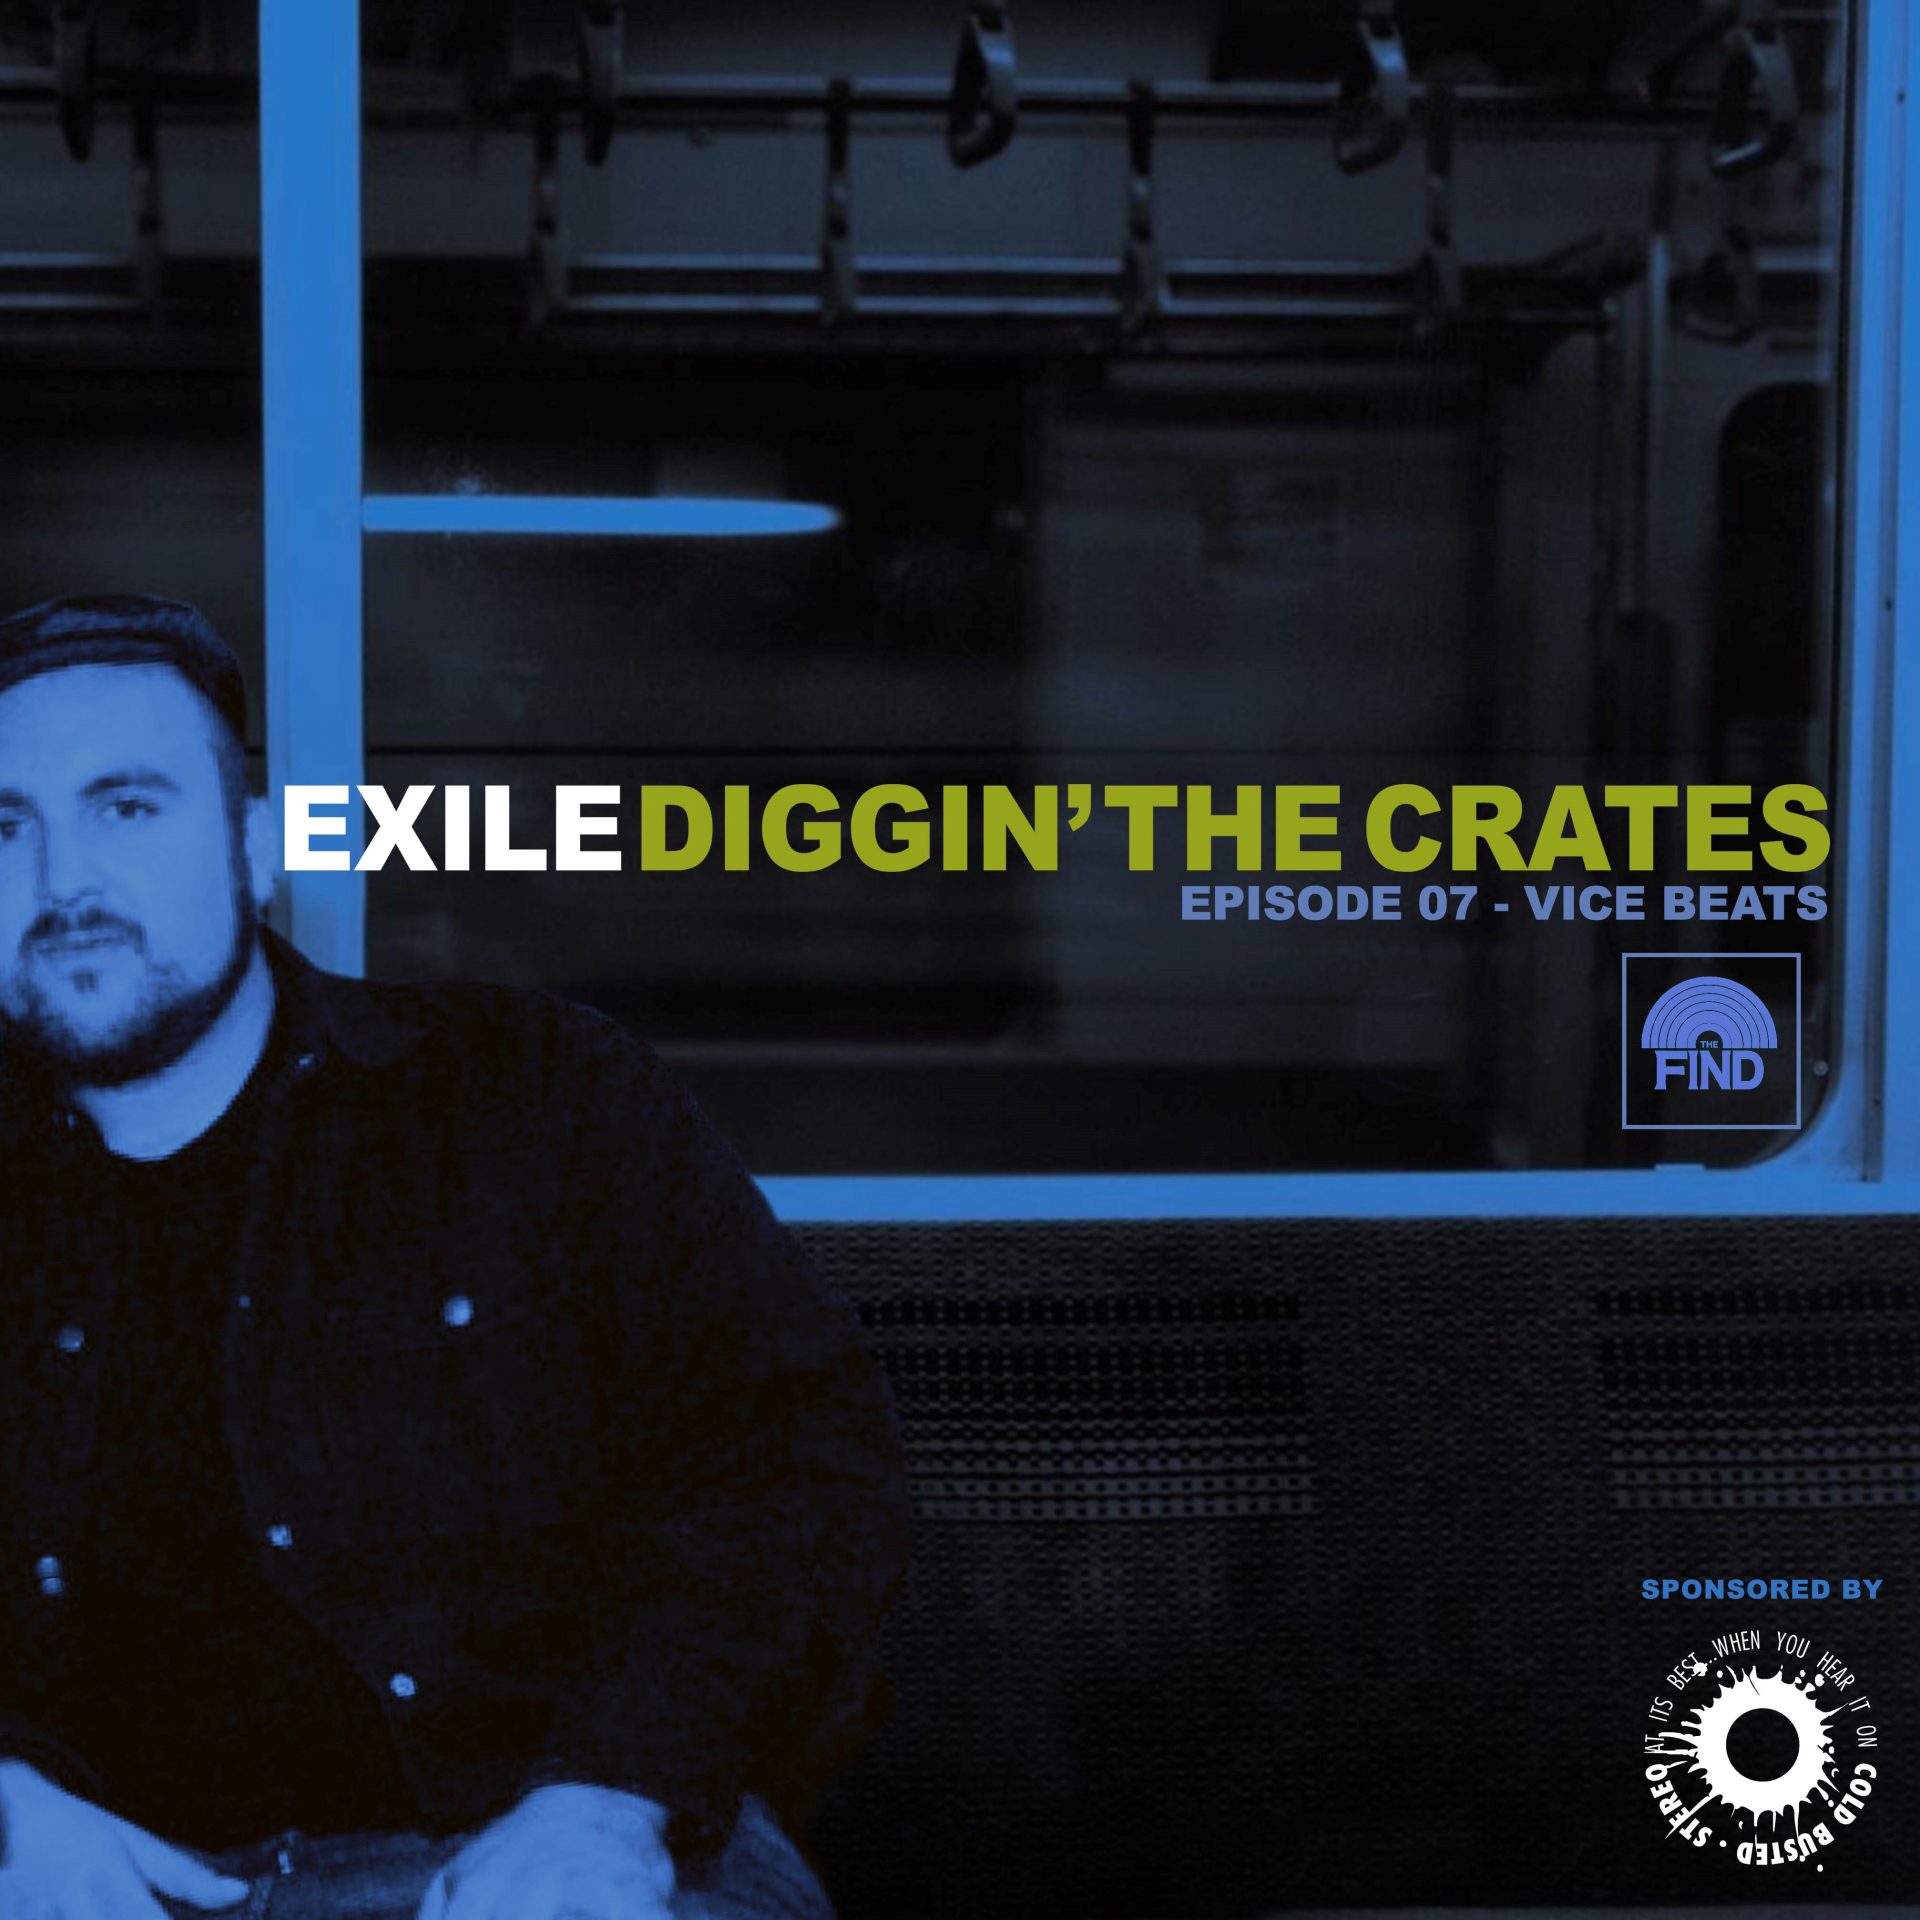 Season 2 Finale of our Diggin’ The Crates podcast